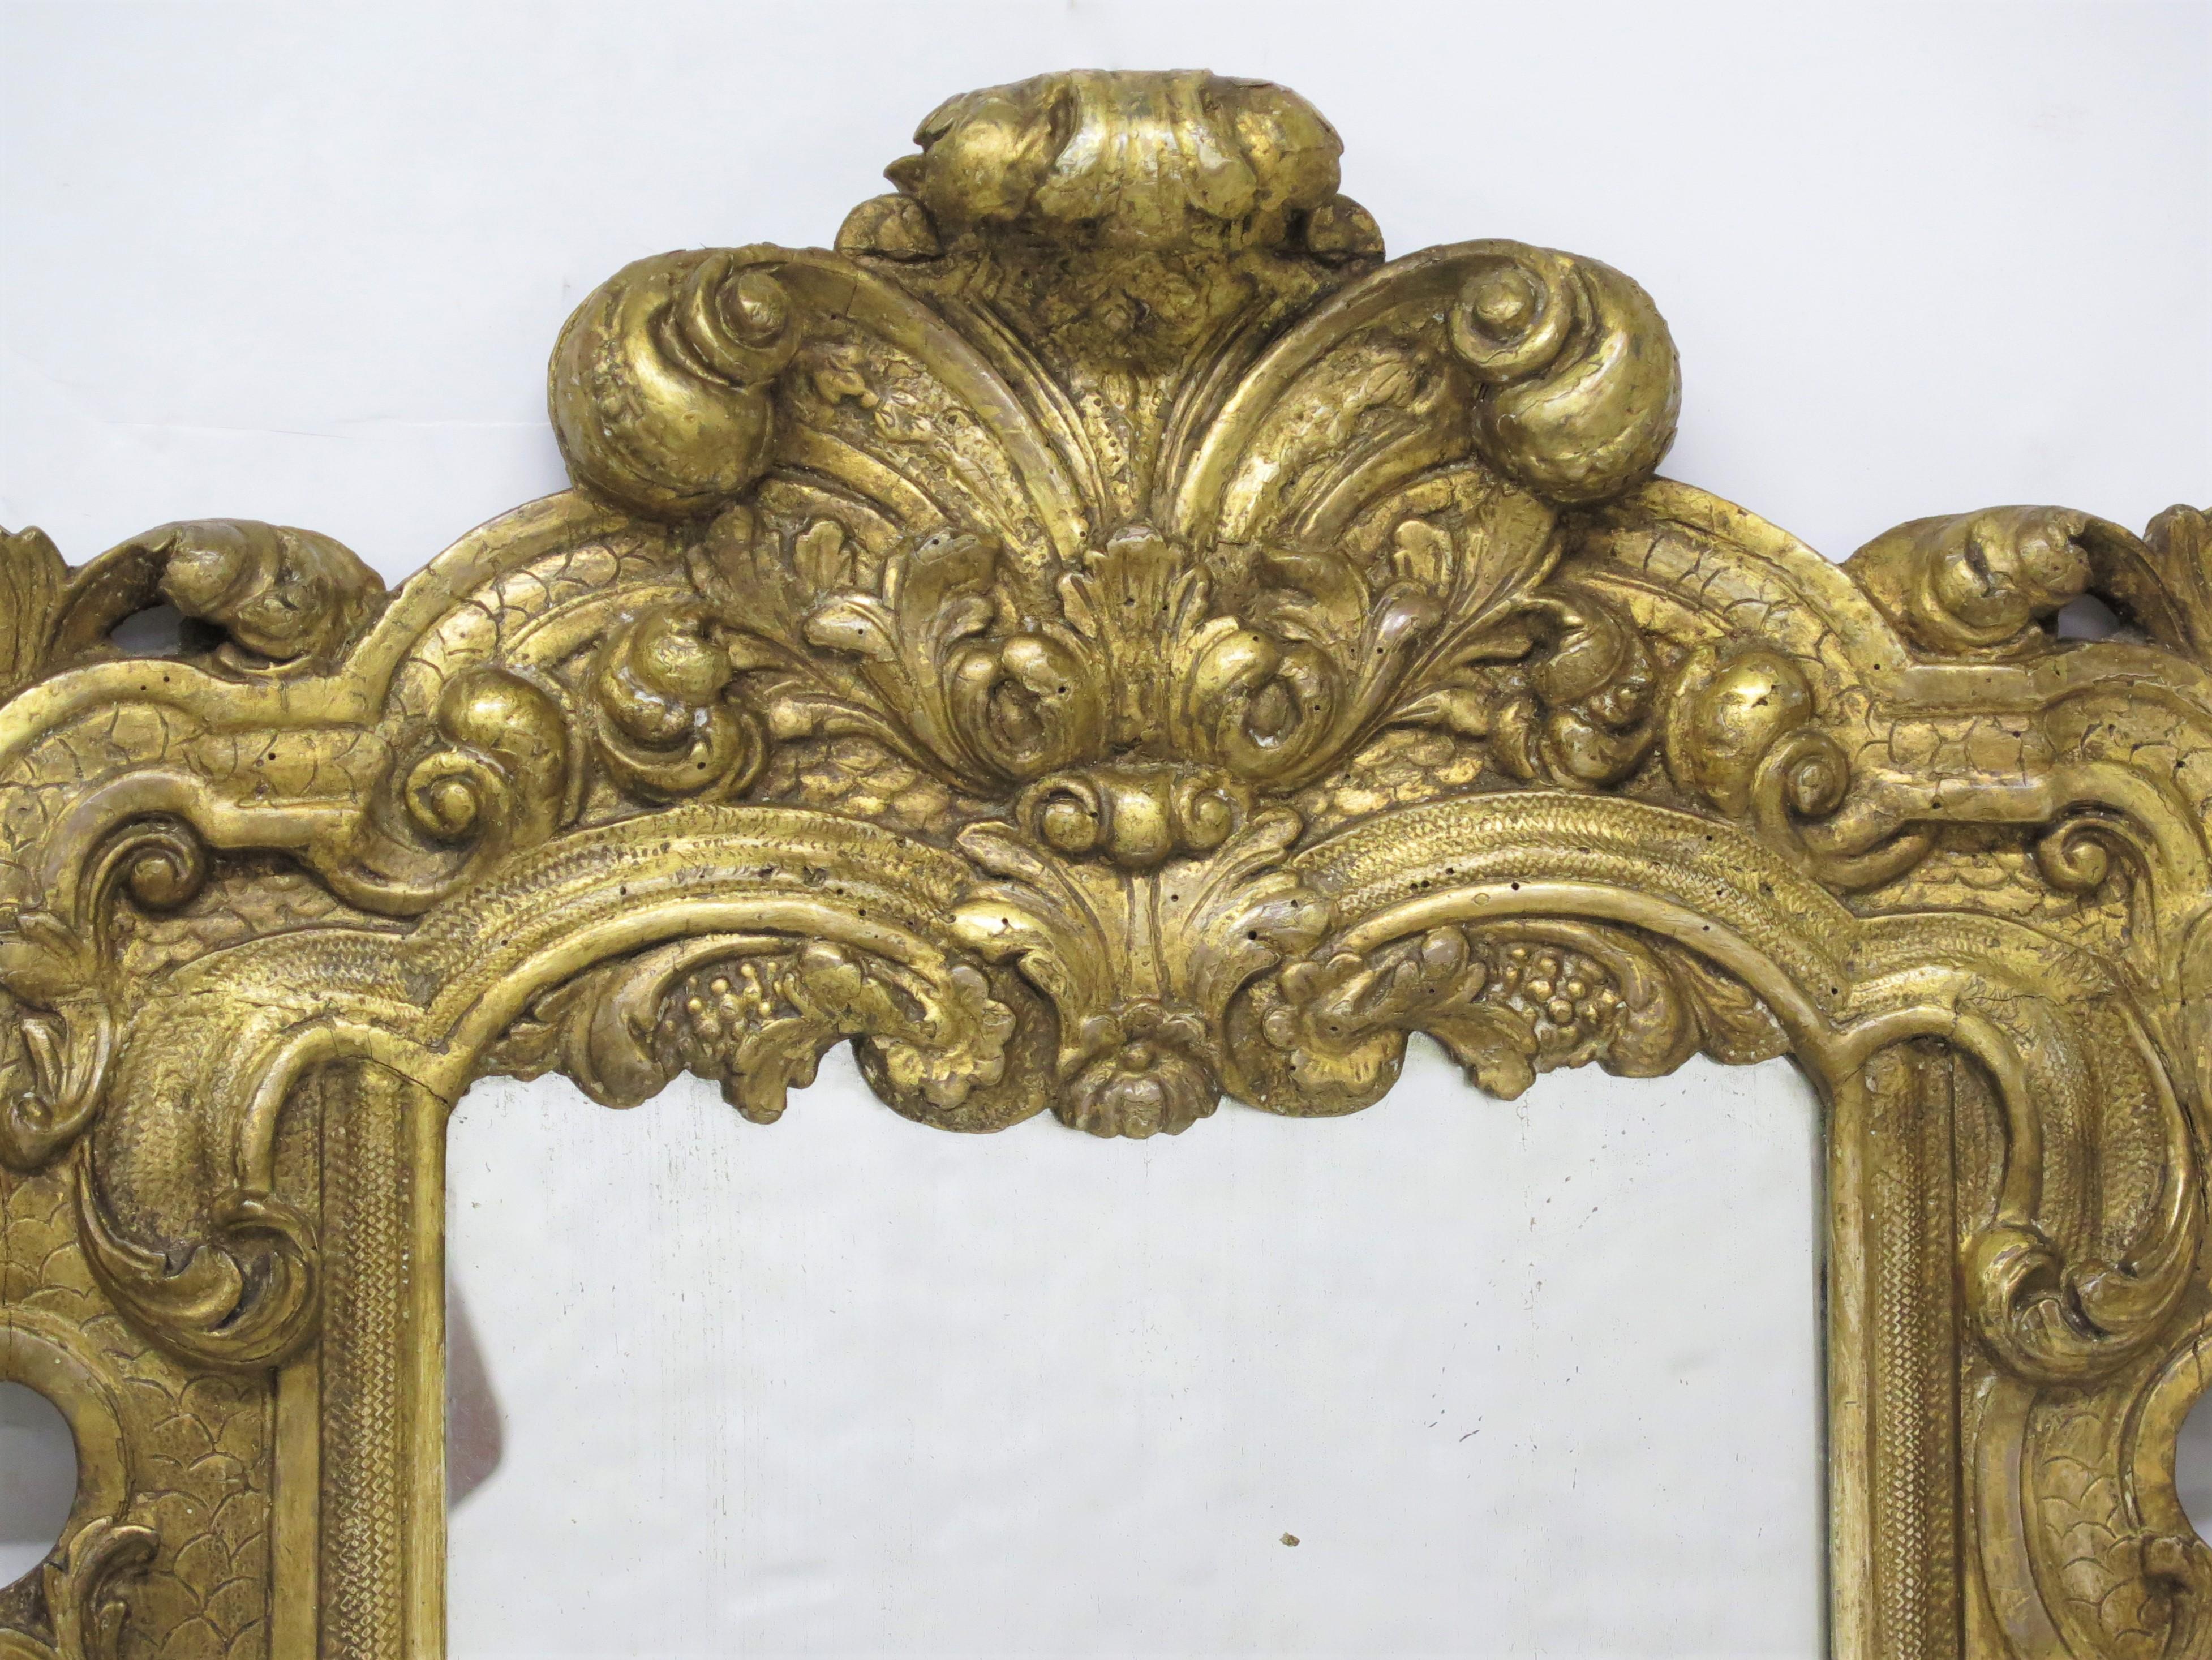 an Italian looking glass / mirror, carved and gilded, with scrolled acanthus leaves and scales. Baroque, 18th century, Italy